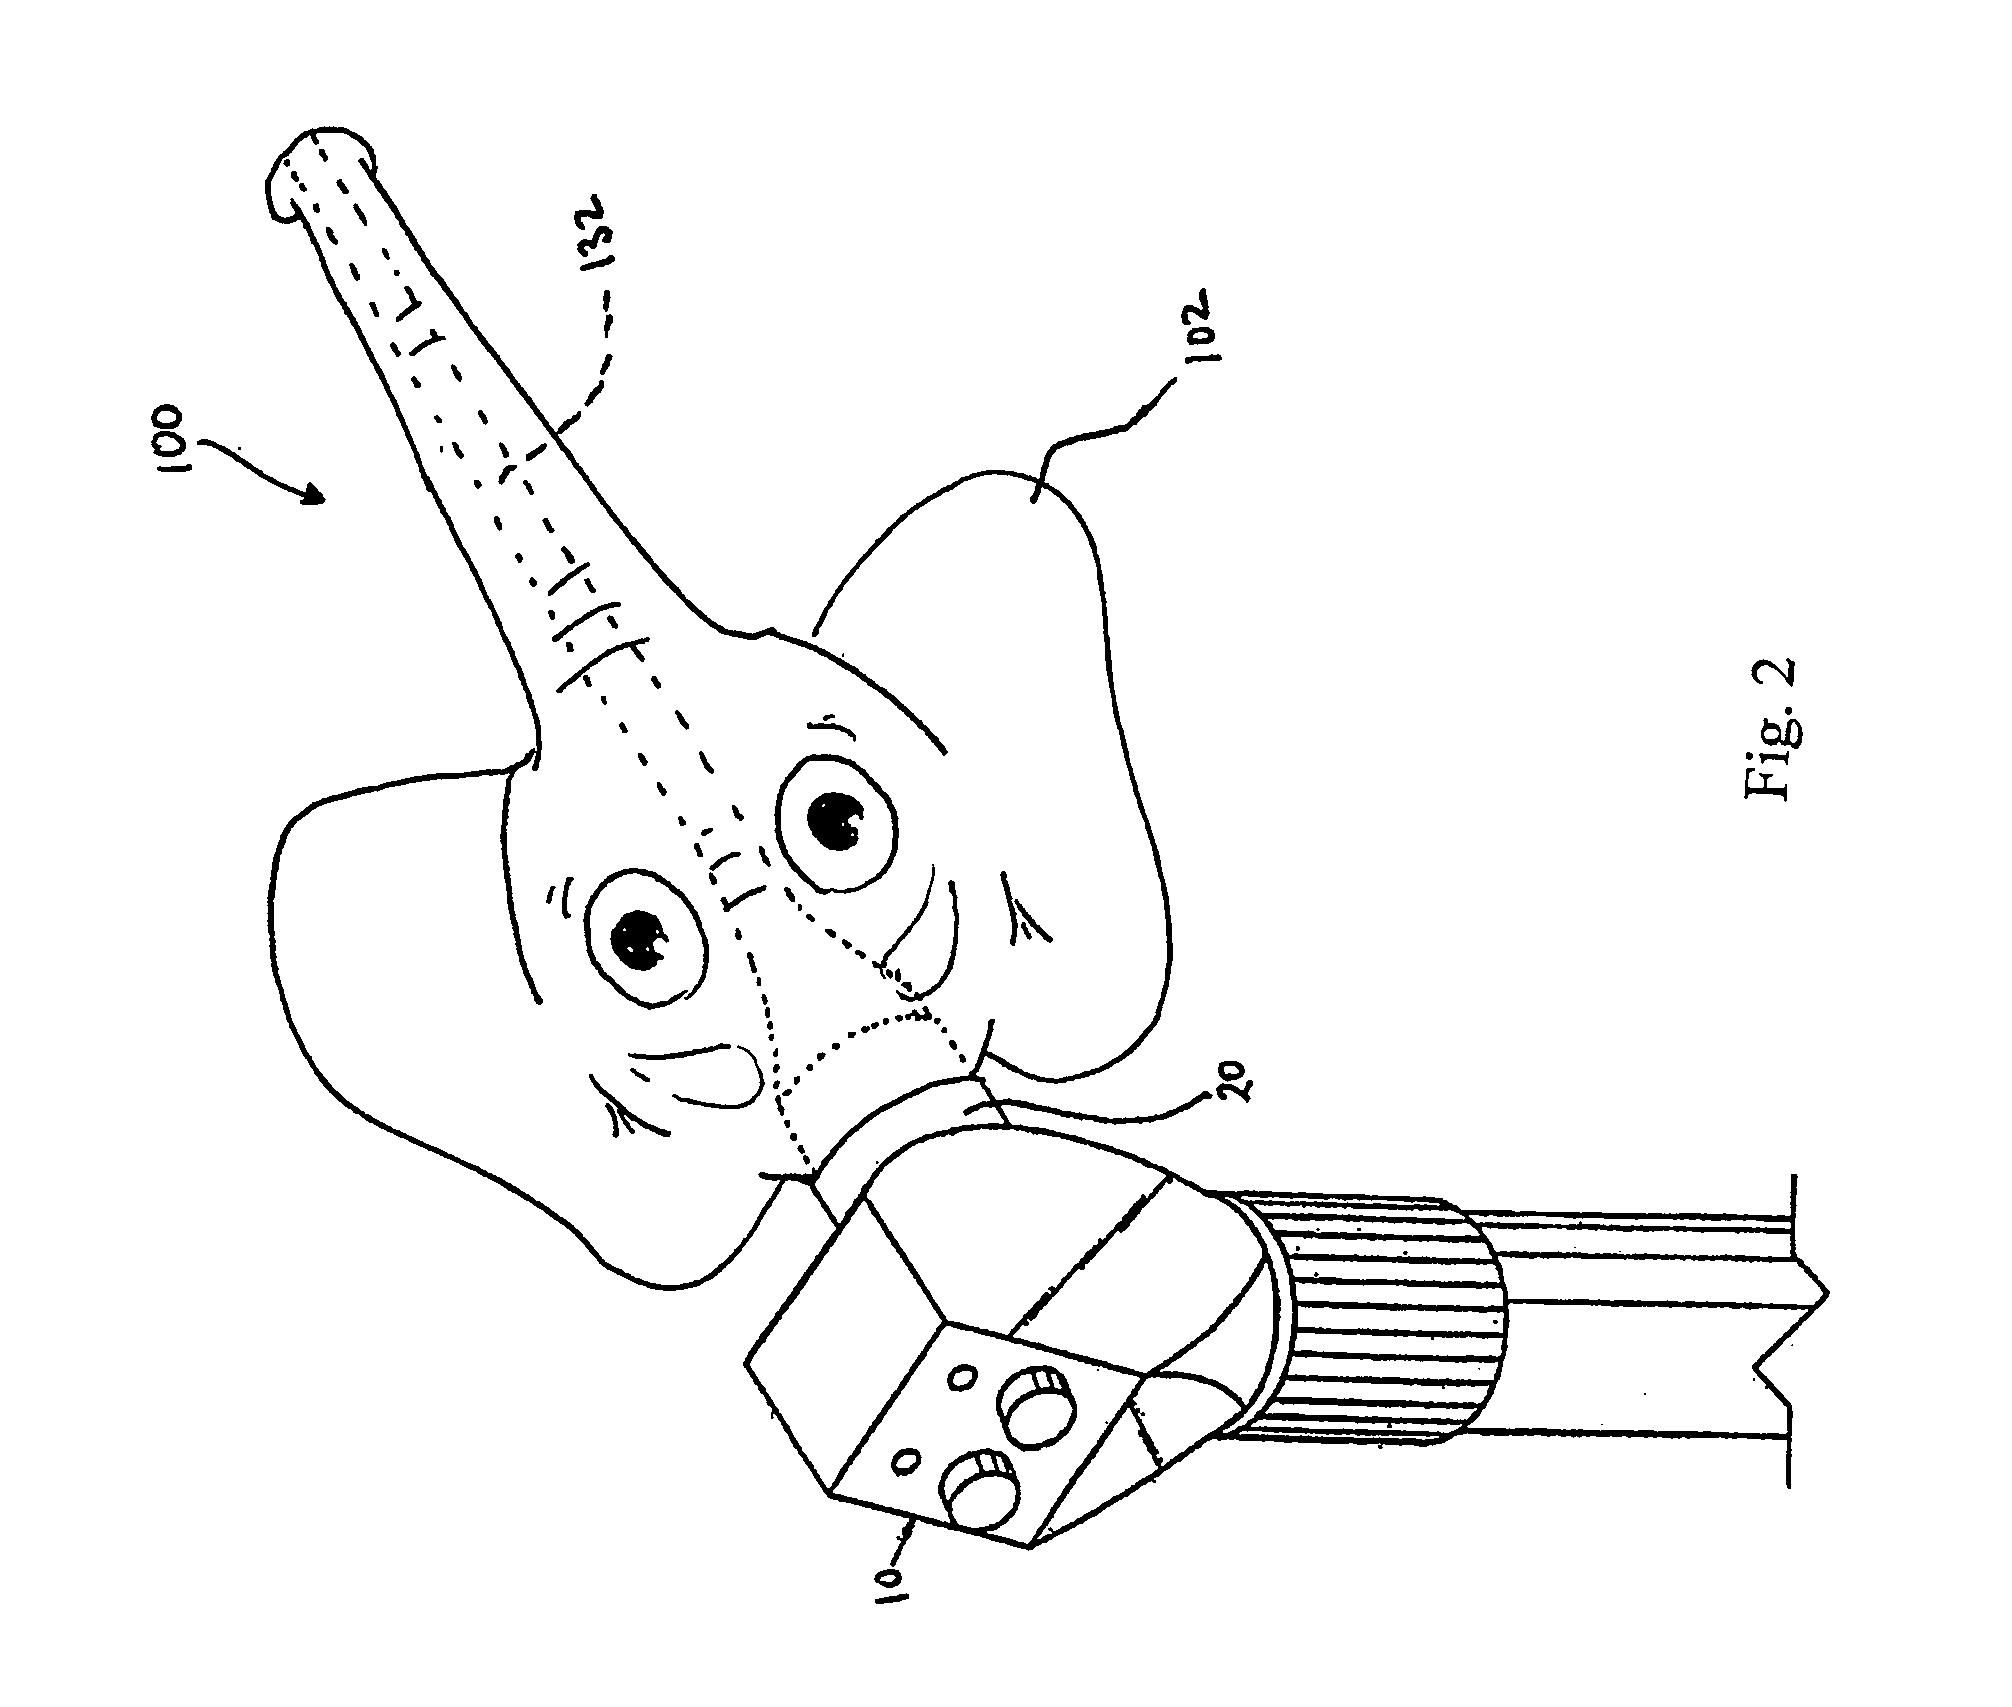 Systems and methods for providing a decorative dental tip